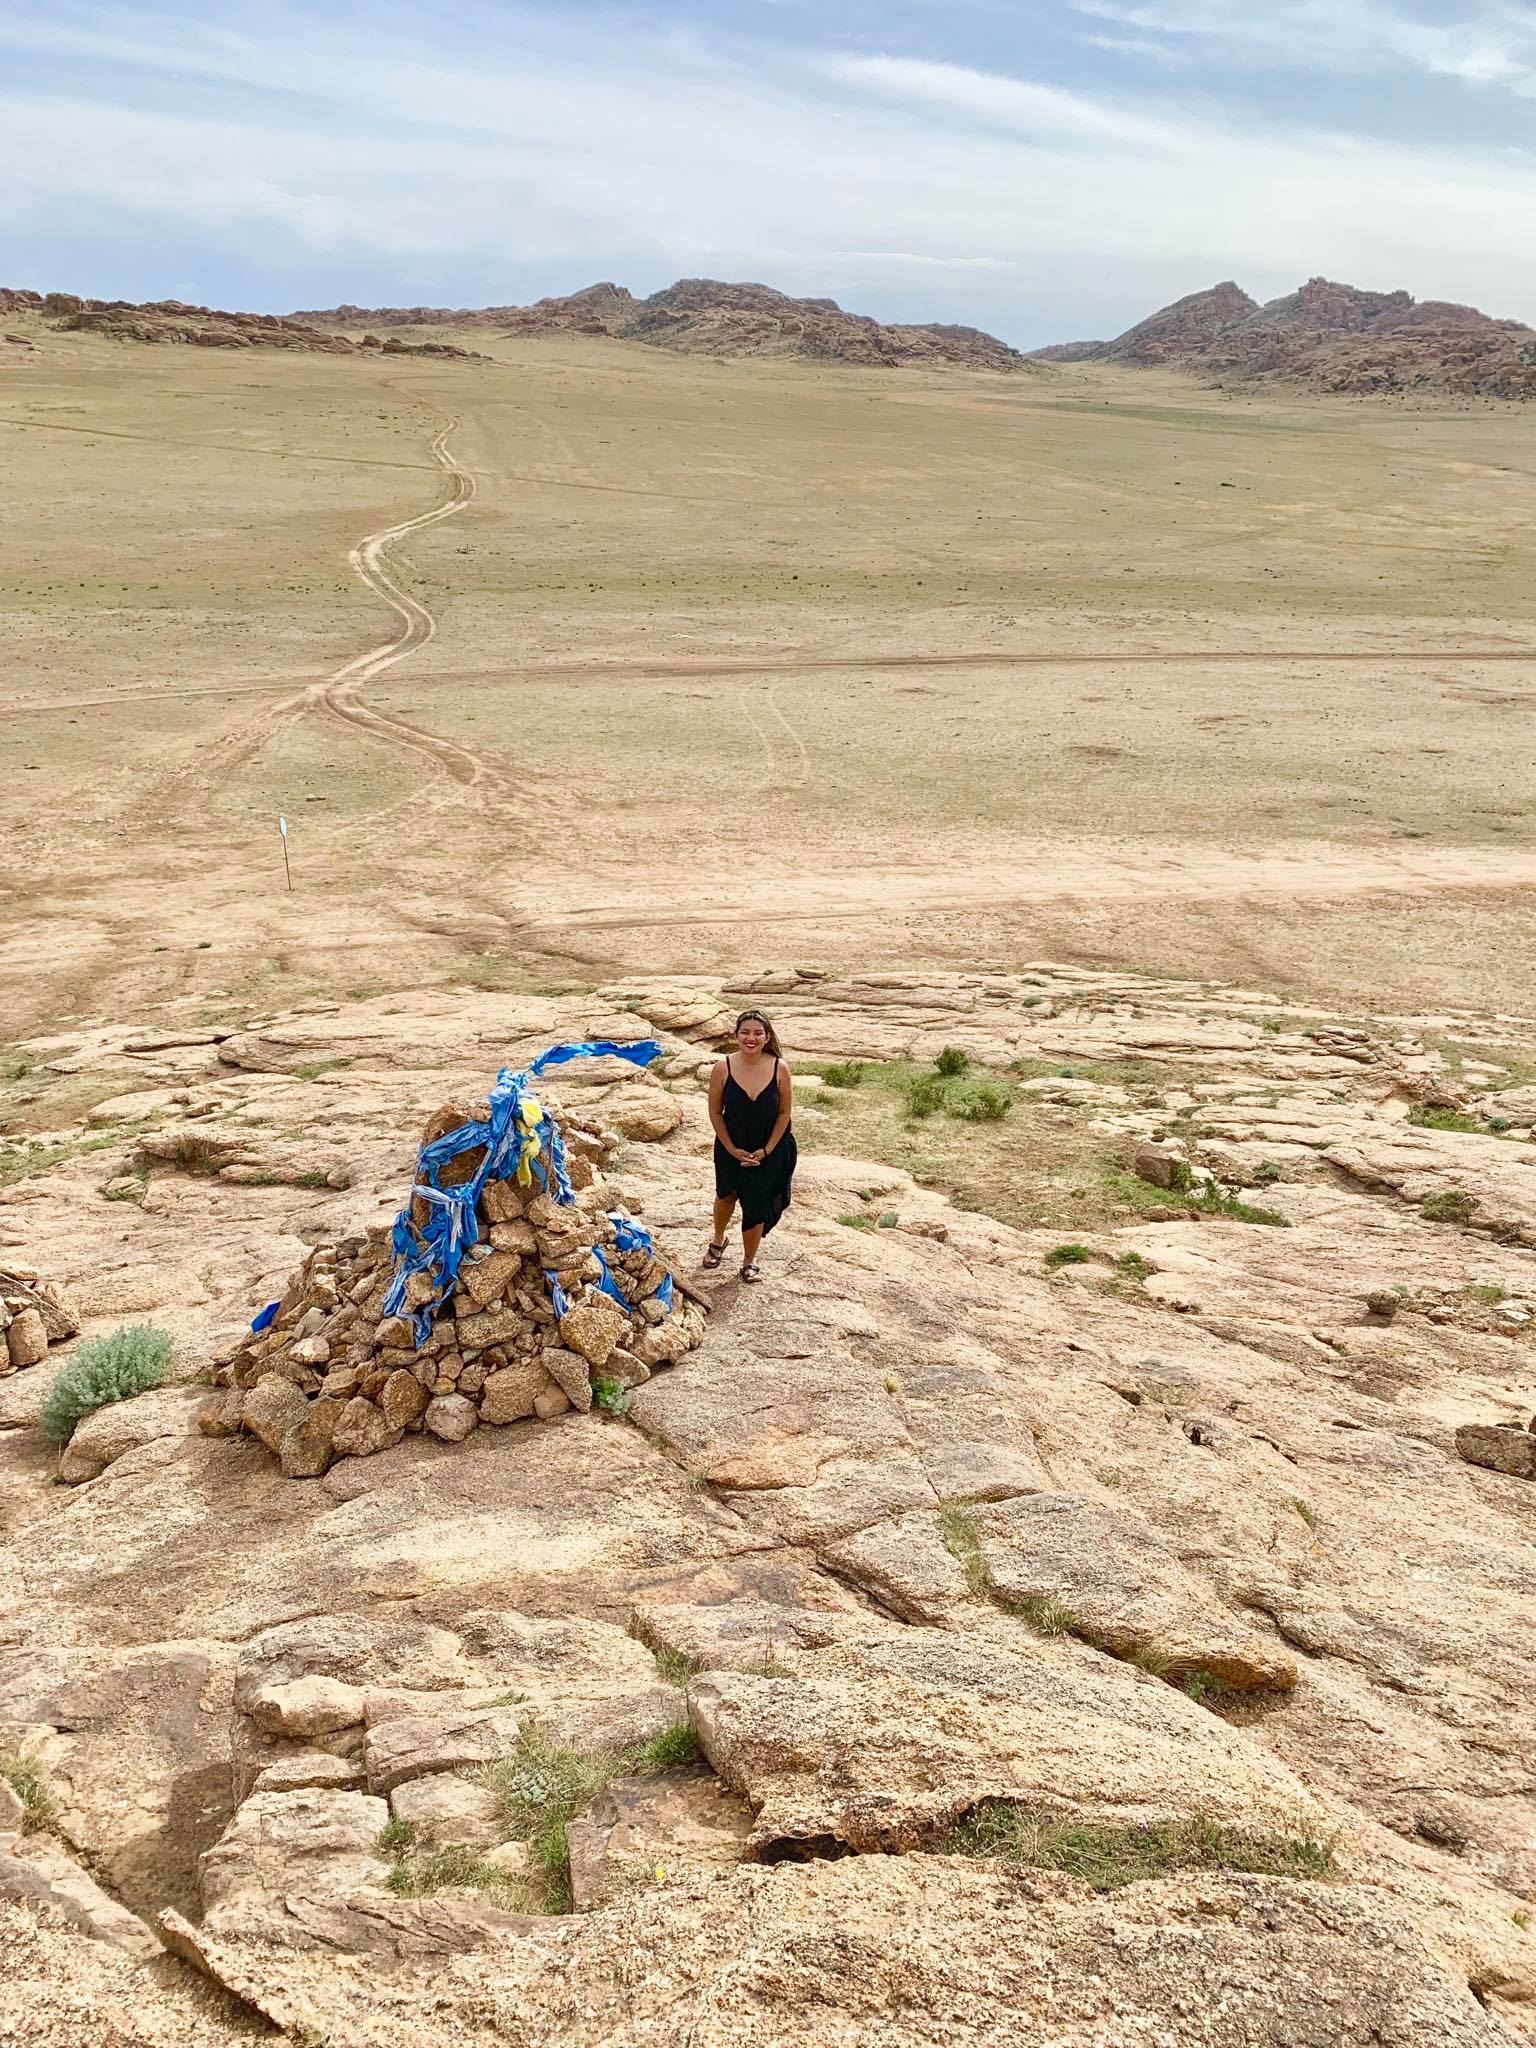 Kach Solo Travels in 2019 One of the hikes during my trip in Gobi desert2.jpg